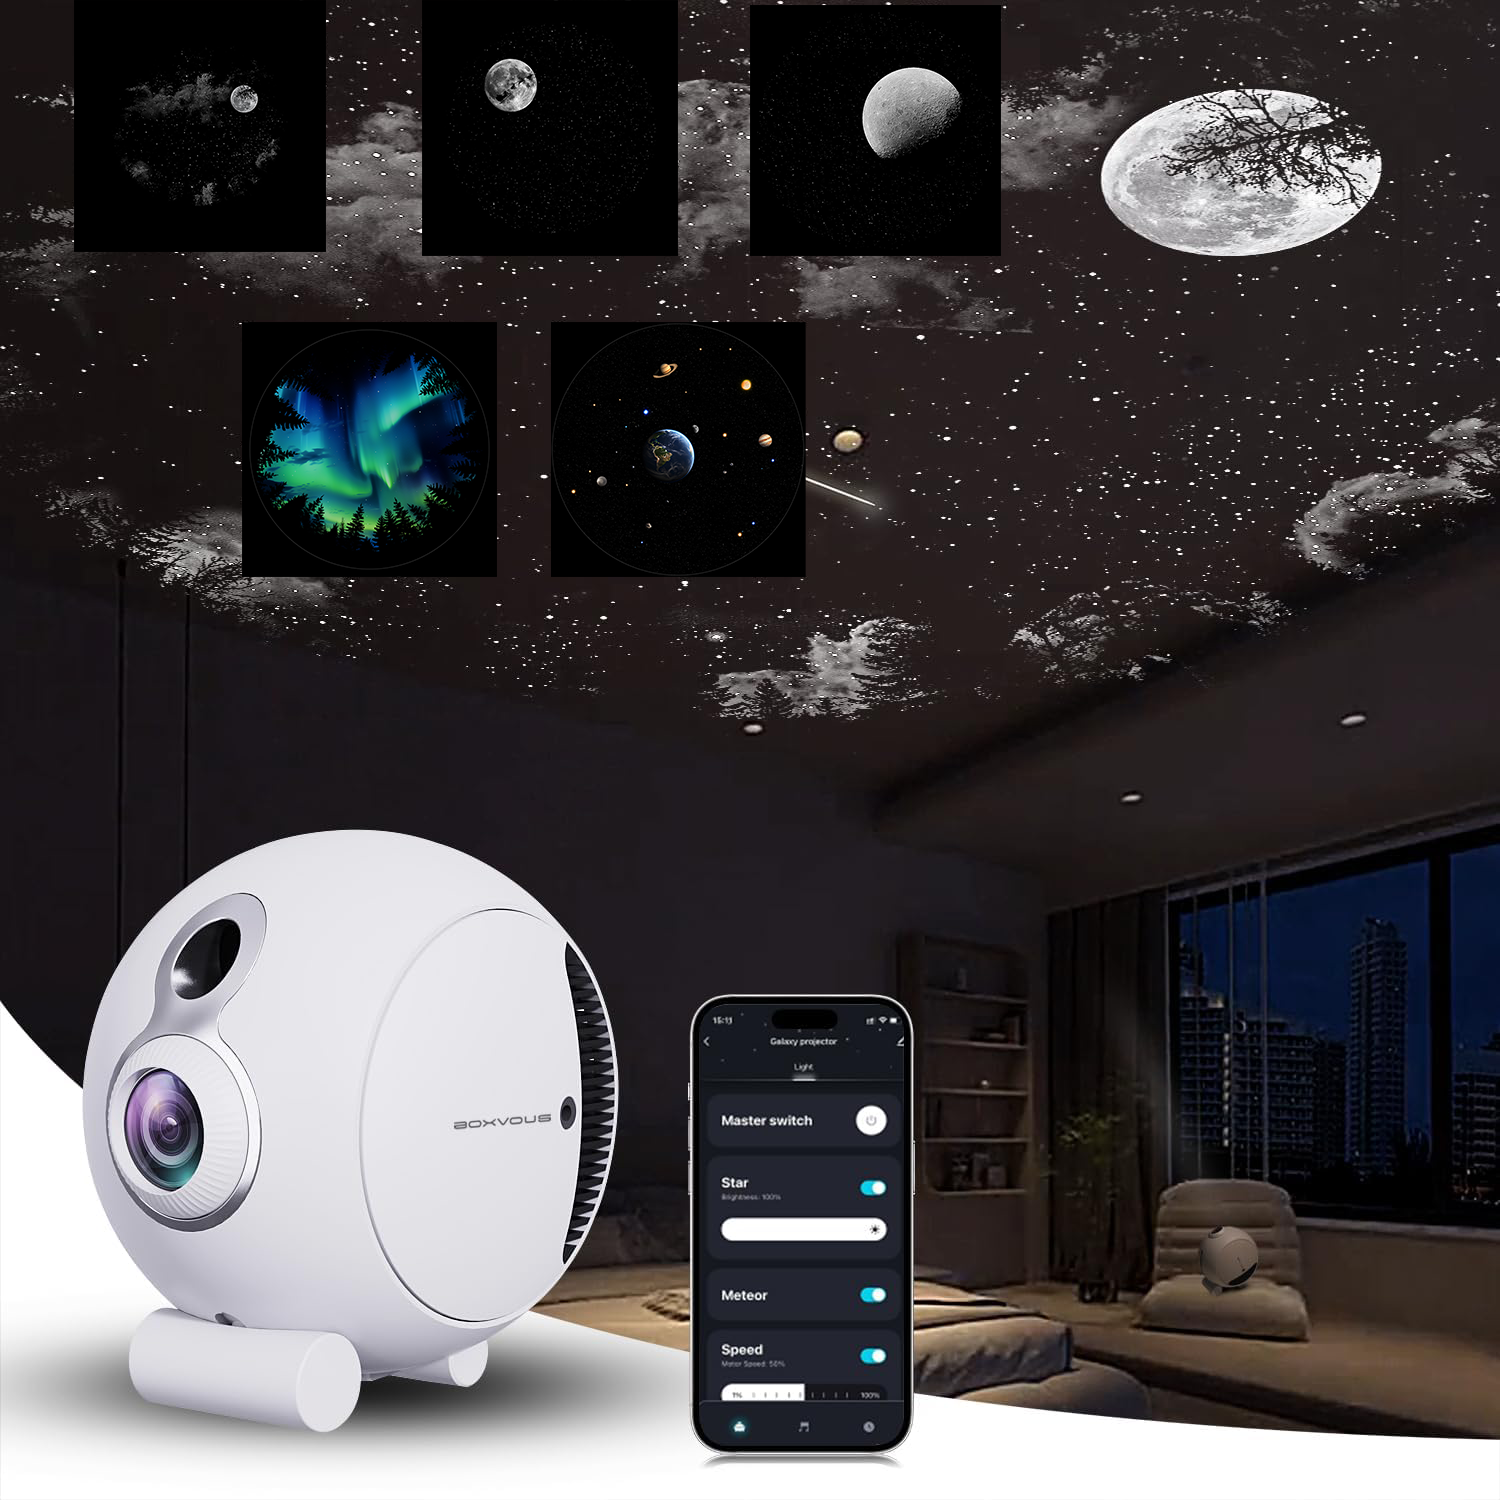 Plus commercial smart starry sky projector-20W